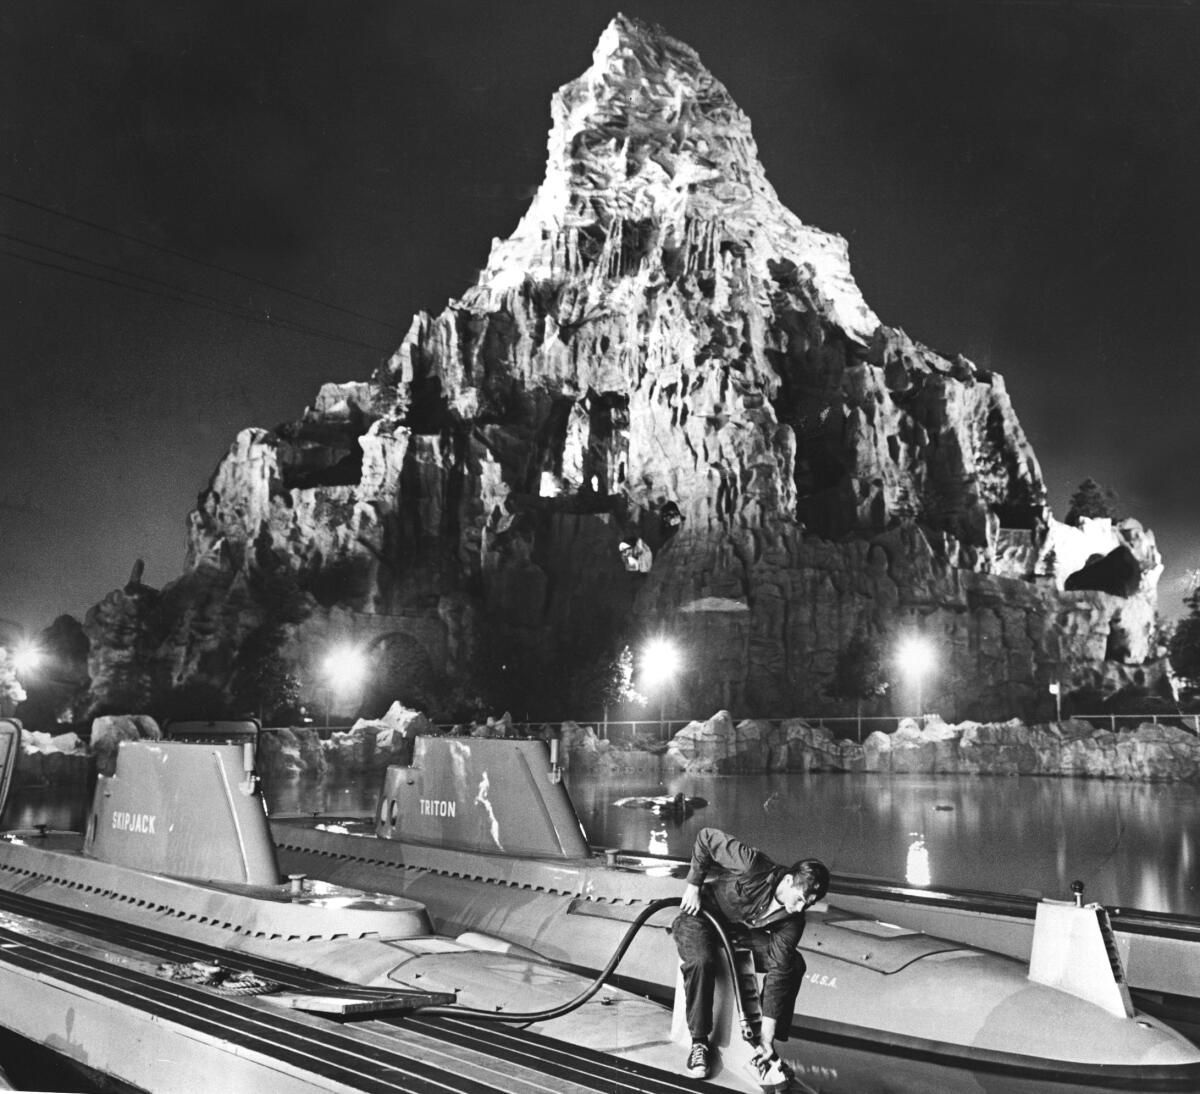 A person cleans a ride at Disneyland with the Matterhorn looming overhead in 1963